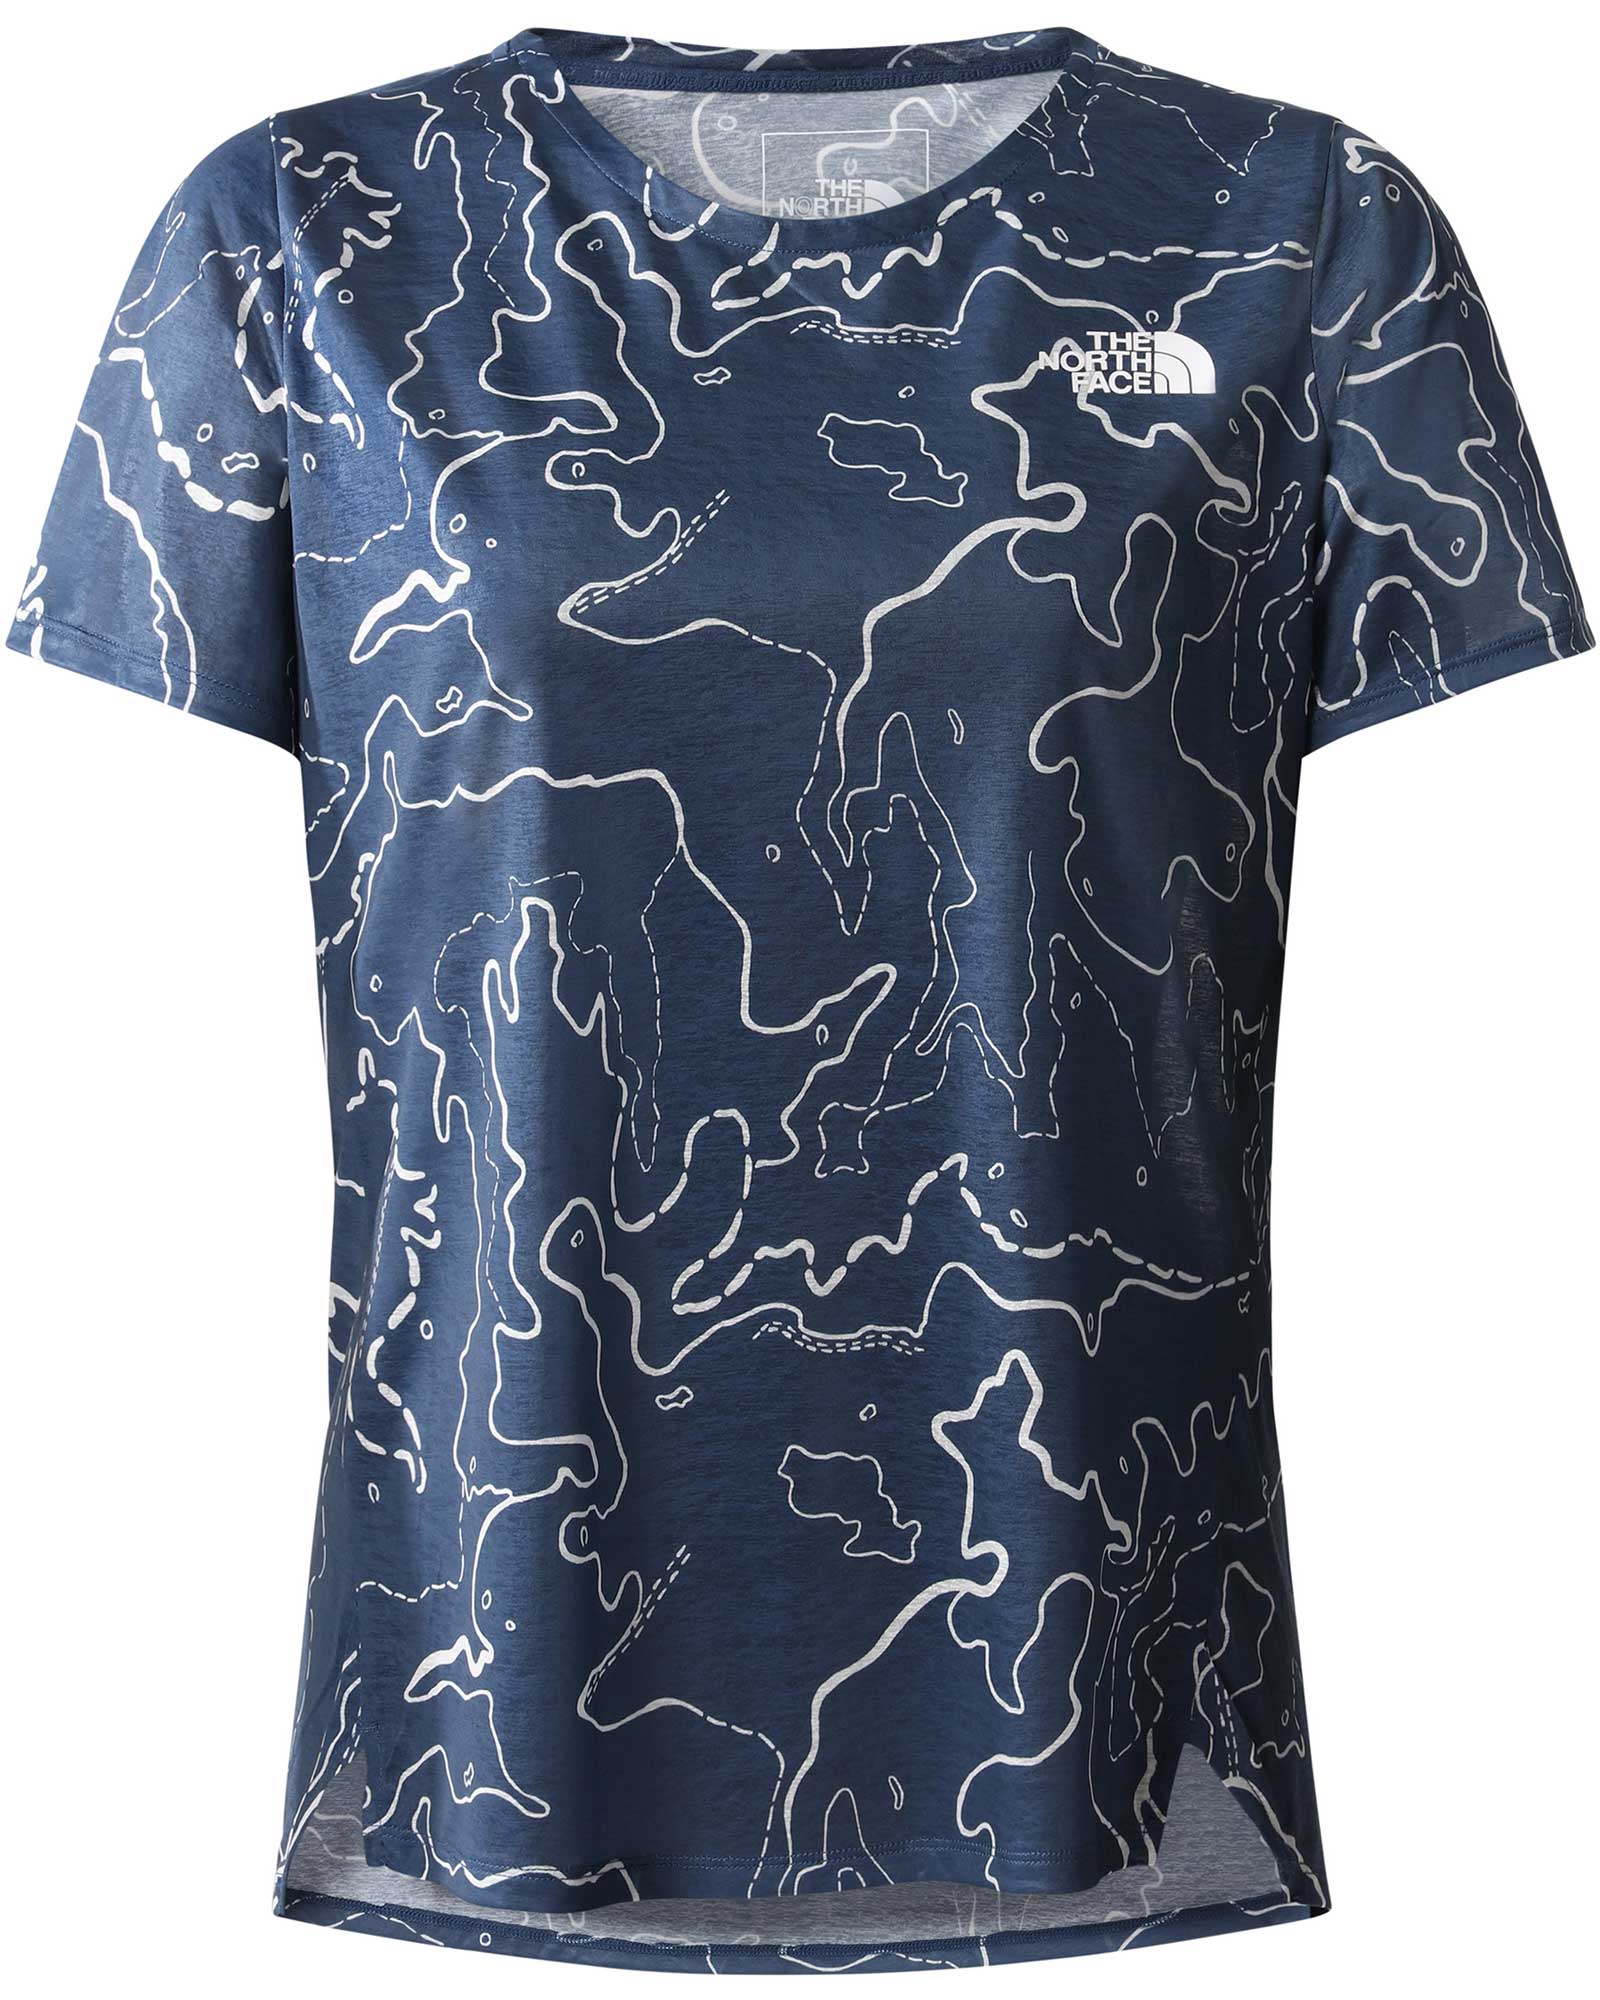 The North Face Simple Dome Women’s Shirt - Shady Blue Topo Print XS